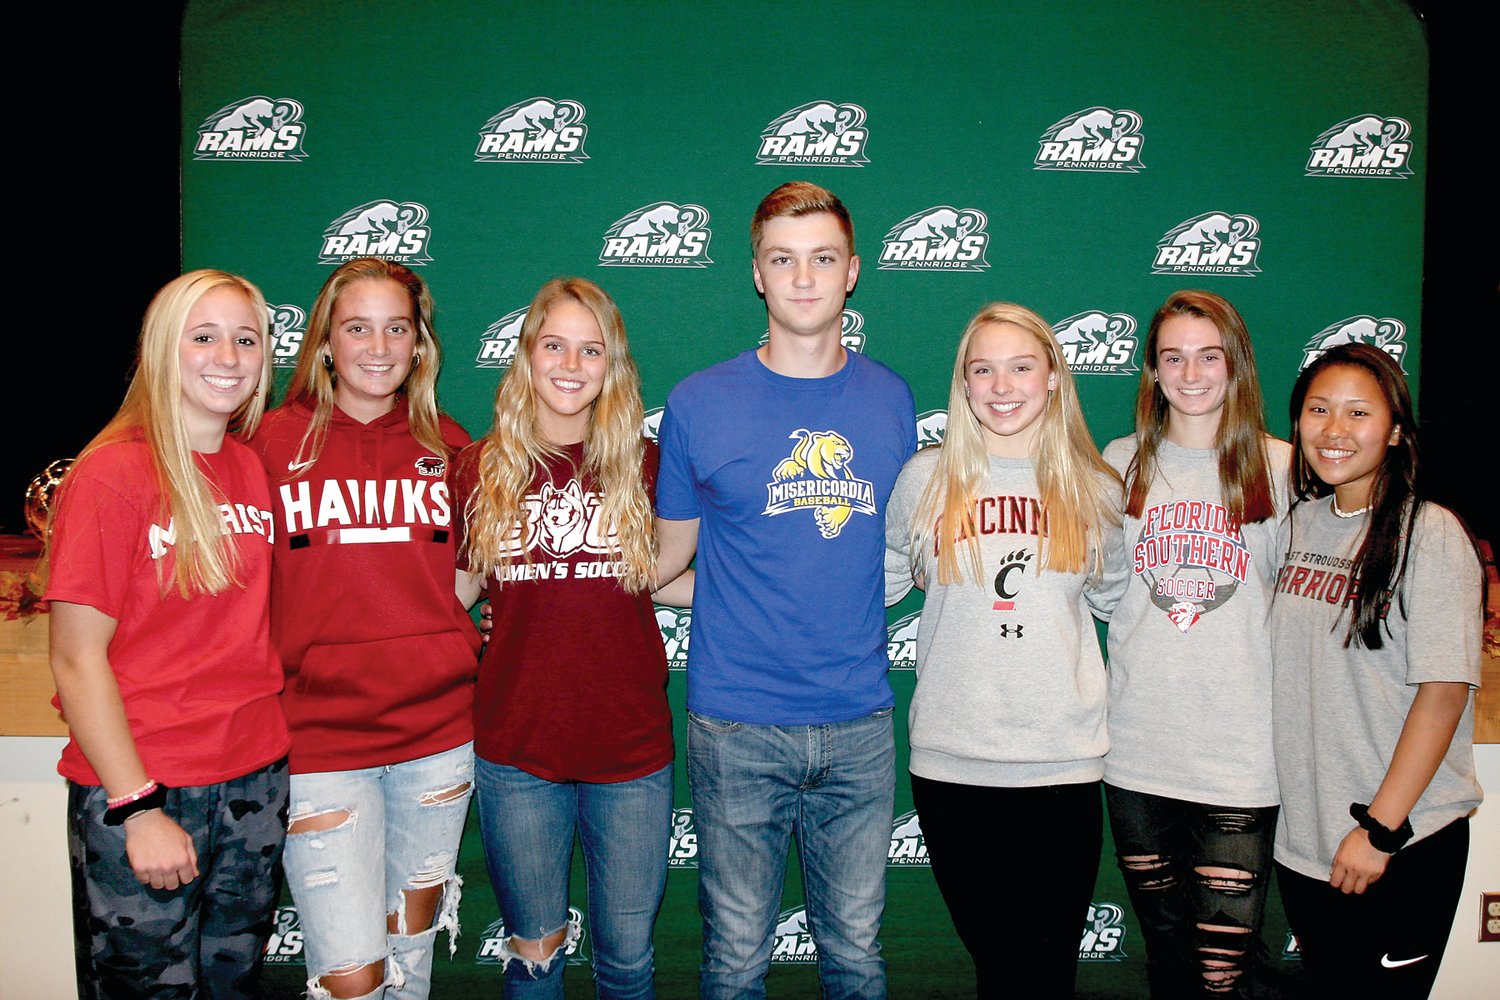 Pennridge recently held a letter of intent signing ceremony for seven seniors. From left are: Chance Hendricks (Marist), Maddie Anderson (St. Joseph’s), Lauren McIntyre (Bloomsburg), Ray Knight (Misericordia), Erin Shema (Cincinnati), Meghan Kriney (Florida Southern) and Rachel Dudek (East Stroudsburg). Photograph by Mary Jane Souder.